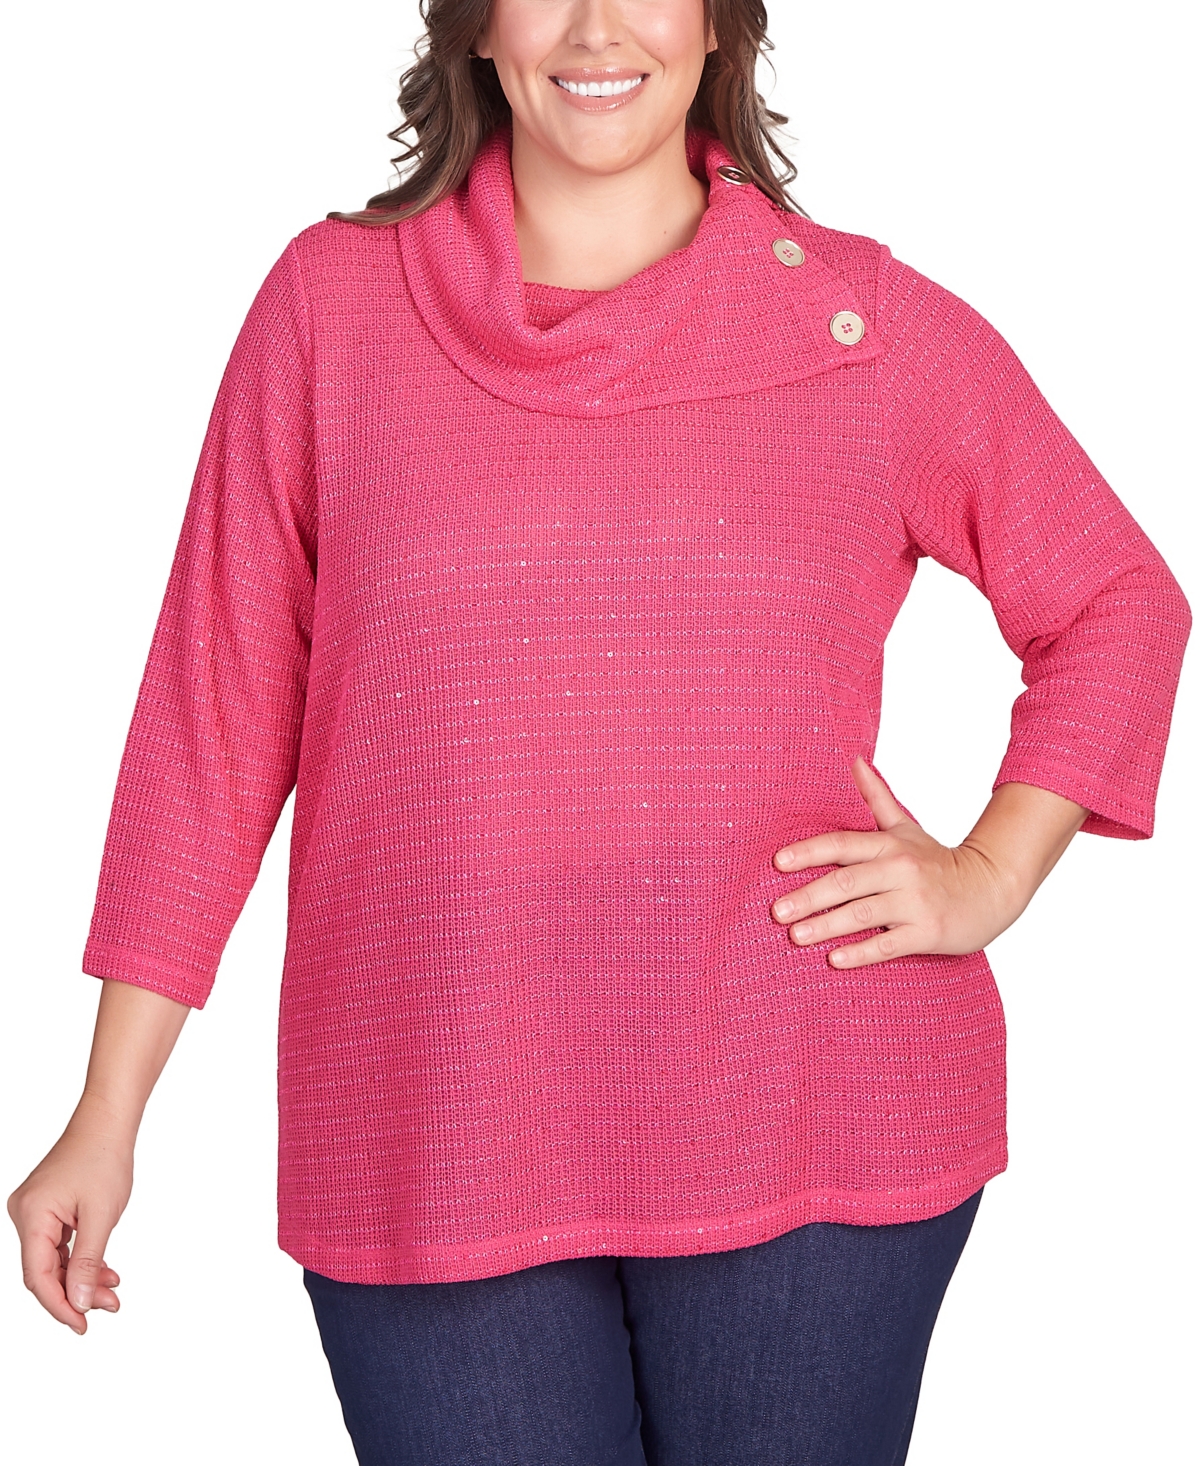 Ruby Rd. Plus Size Soft Sequin Cowl Neck Top In Bright Pink